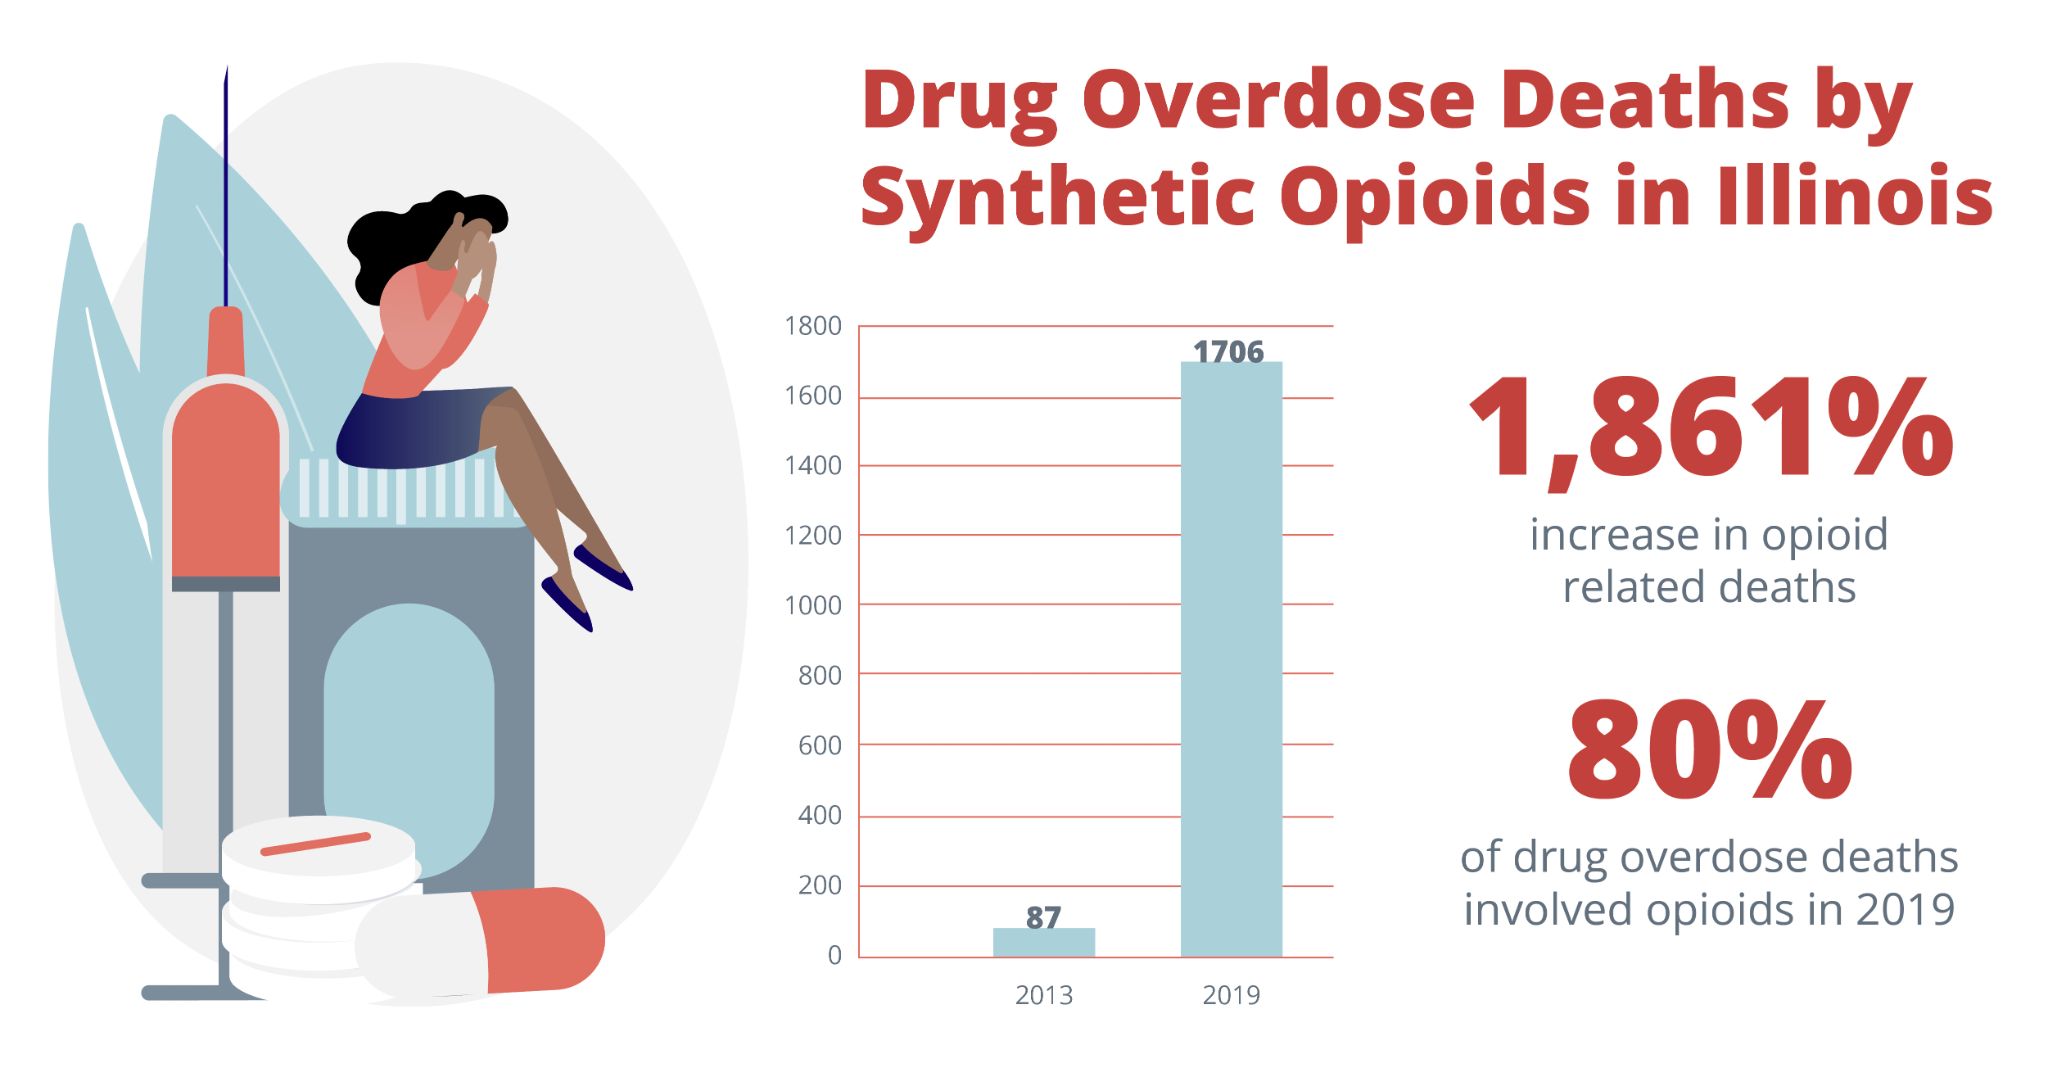 Drug overdose deaths by synthetic opioids in illinois. 1,861% increase in opioid related deaths. 80% of drug overdose deaths involved opioids in 2019. Drug And Alcohol Detox & Rehab, Addiction Treatment Resources in Barrington Illinois